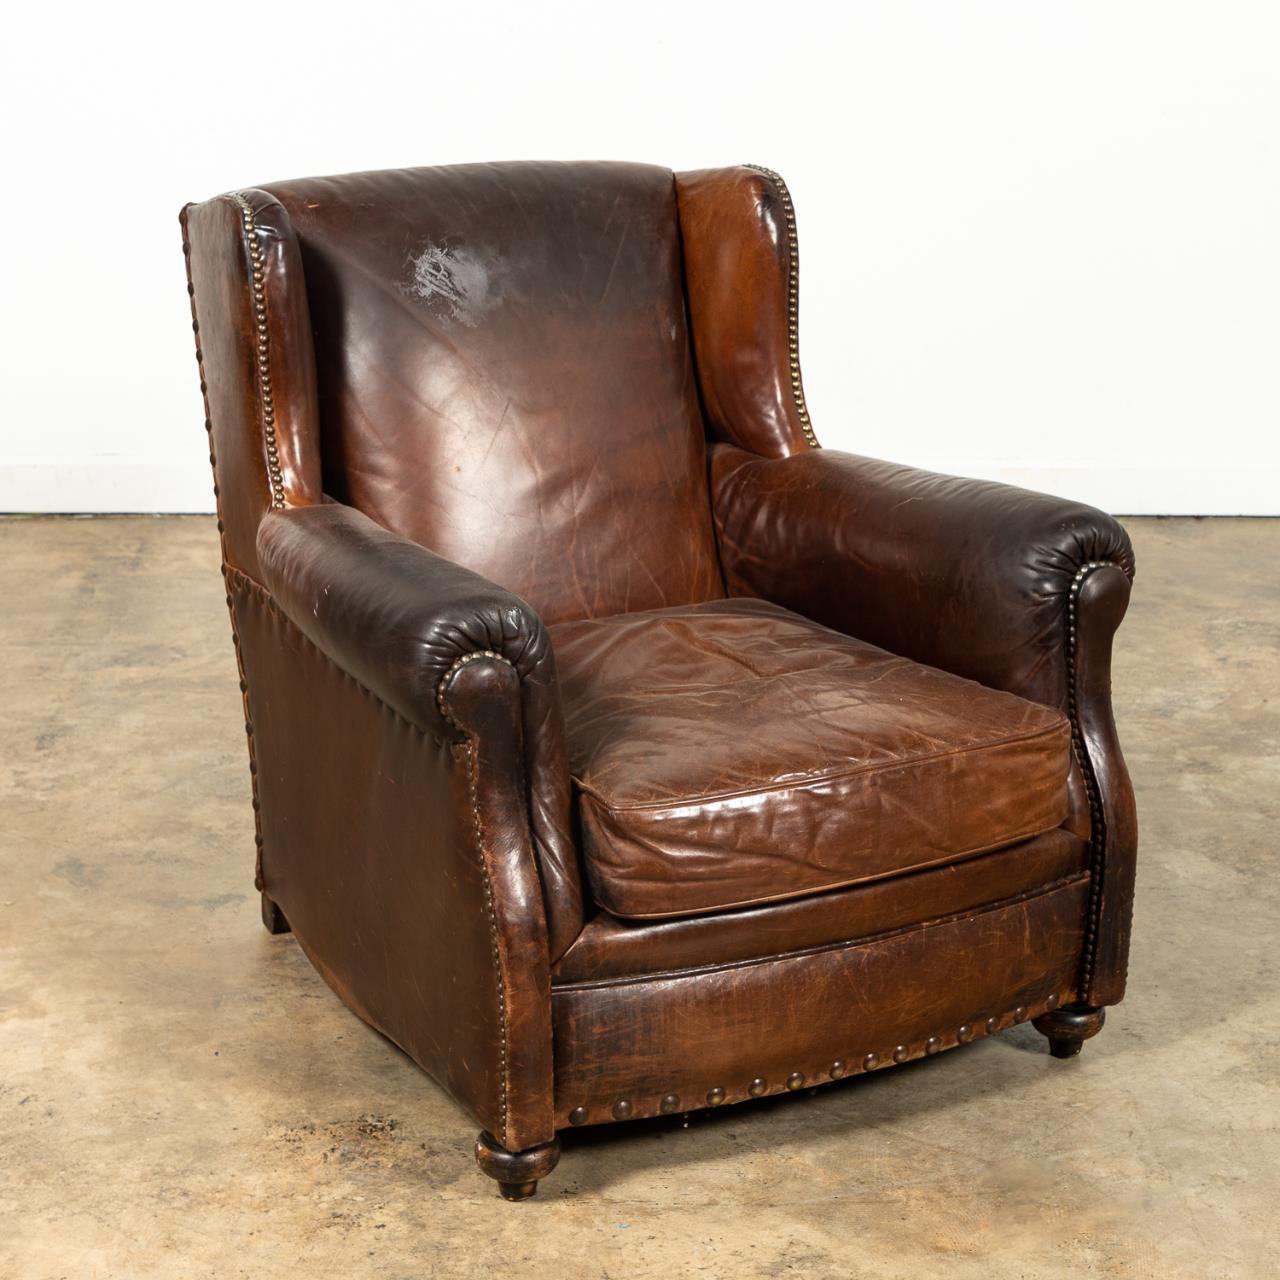 BROWN LEATHER UPHOLSTERED LOUNGE 35b2f8